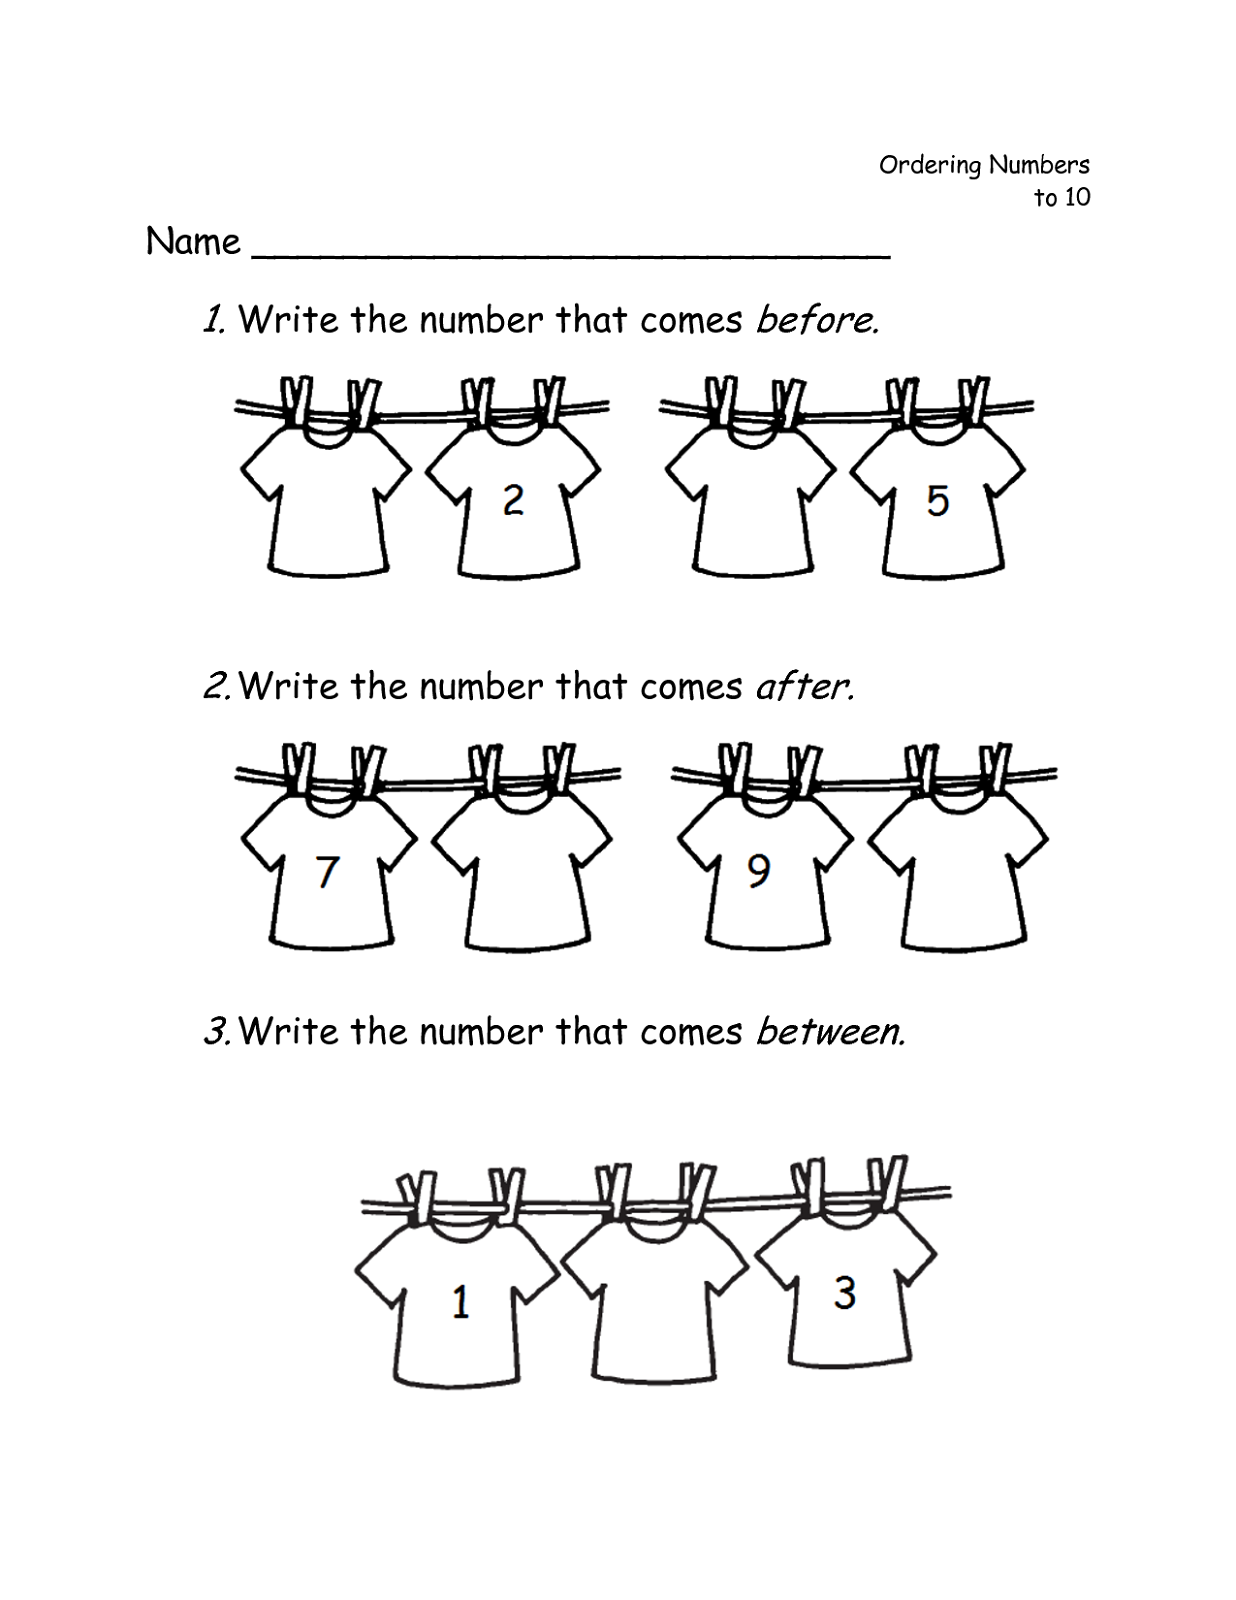 before and after number worksheet for kids